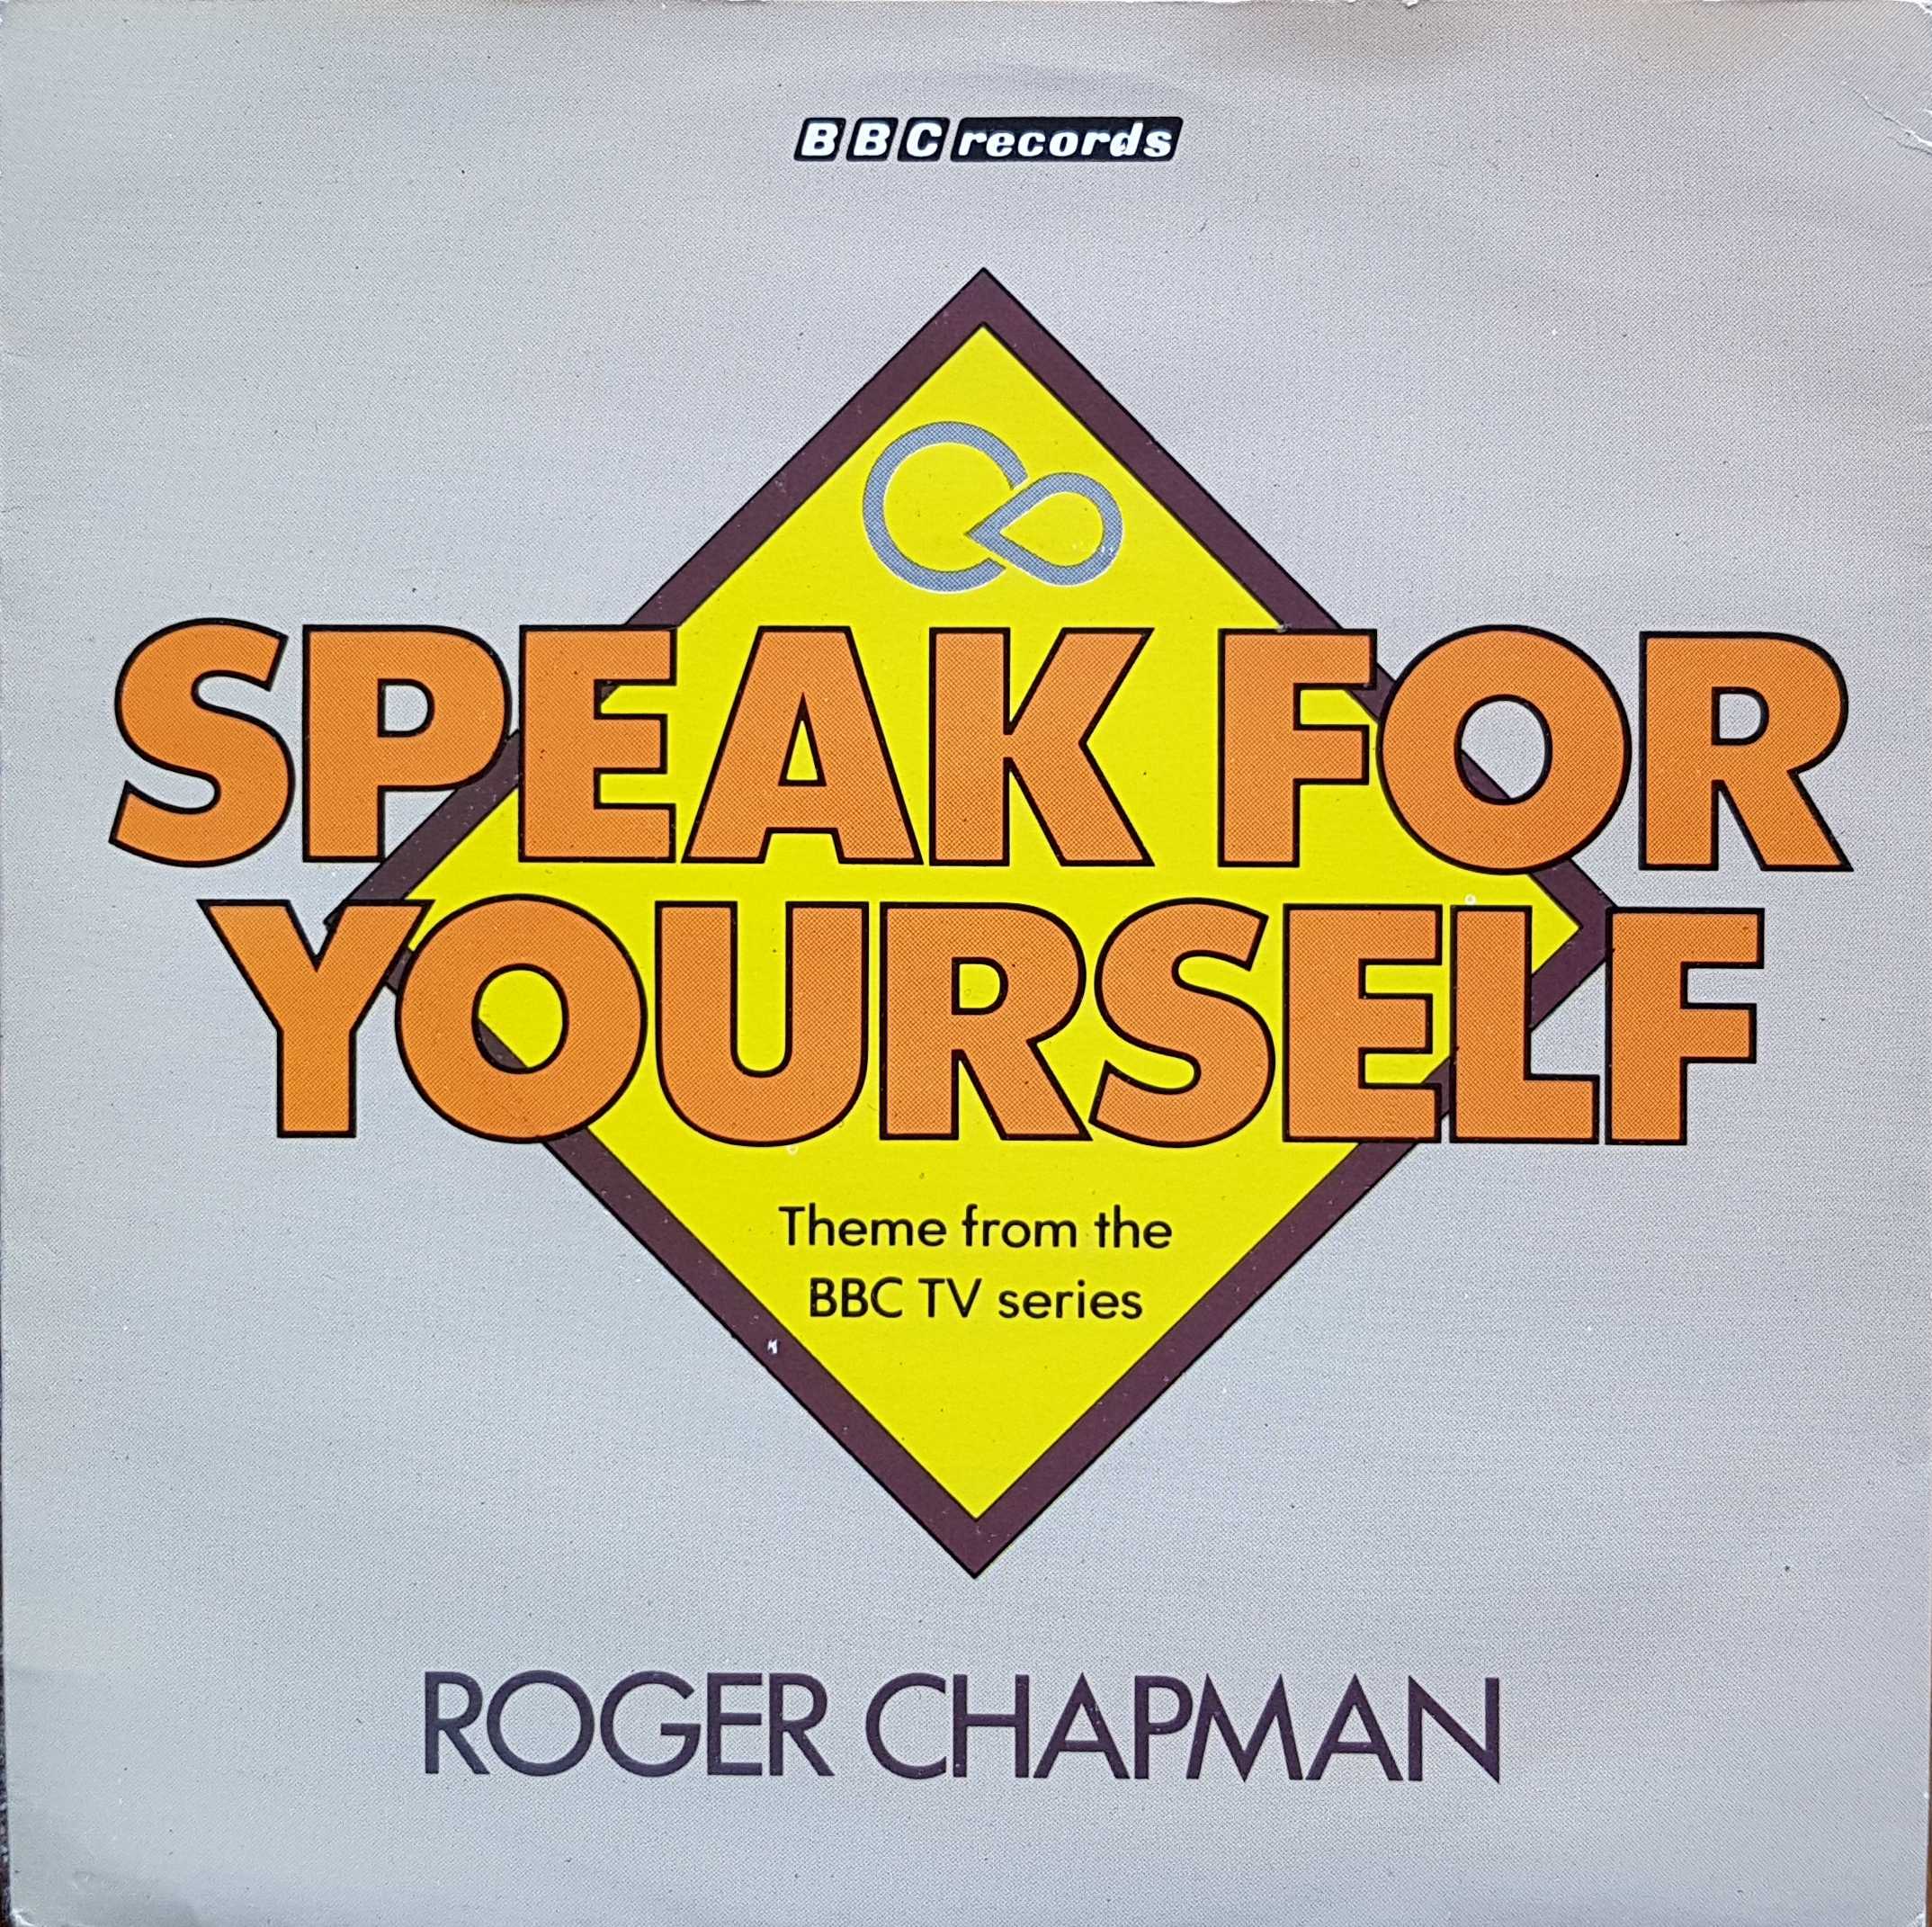 Picture of RESL 85 Speak for yourself by artist George Fenton / Roger Chapman from the BBC singles - Records and Tapes library